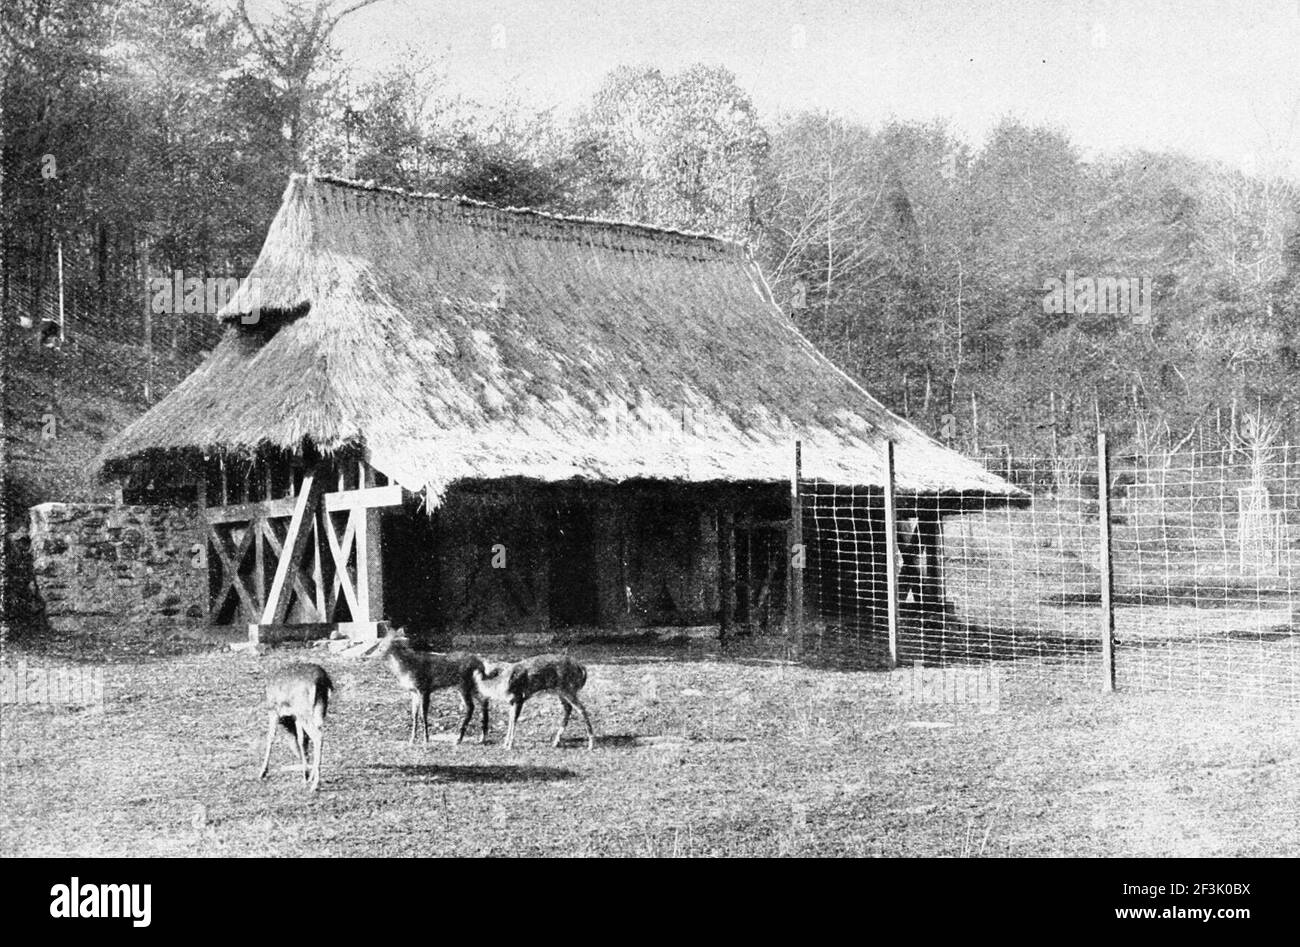 Deer house in the national zoological park. Stock Photo